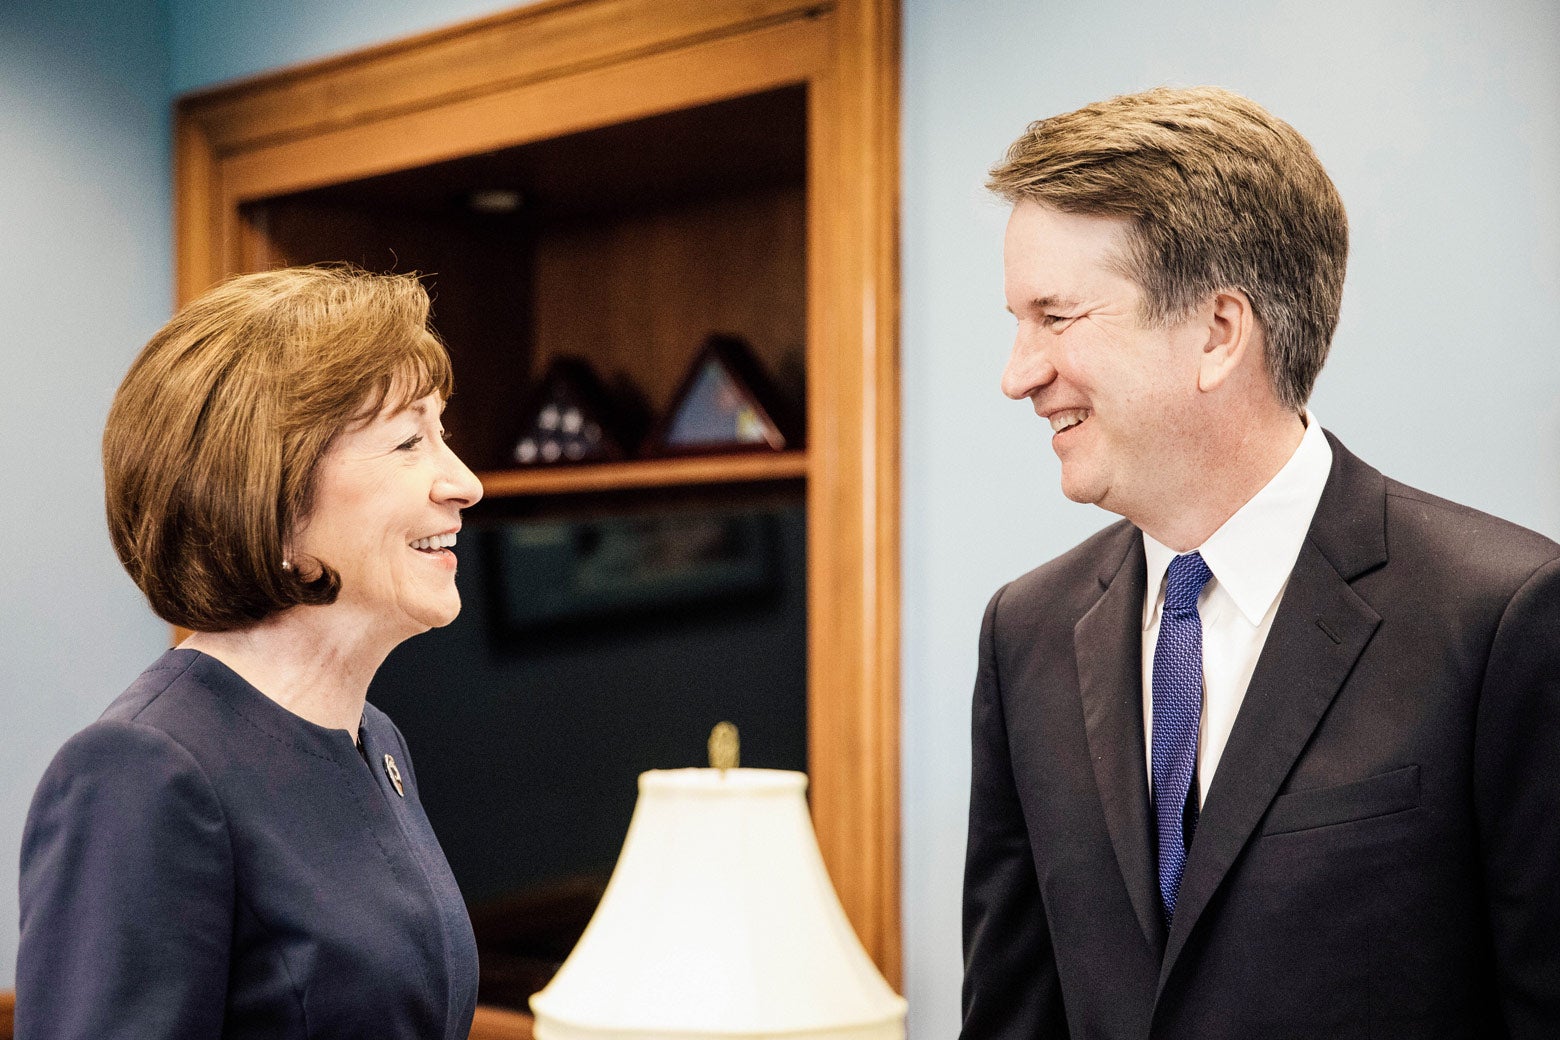 U.S. Sen. Susan Collins meets with Supreme Court nominee Brett Kavanaugh on Capitol Hill on Aug. 21.